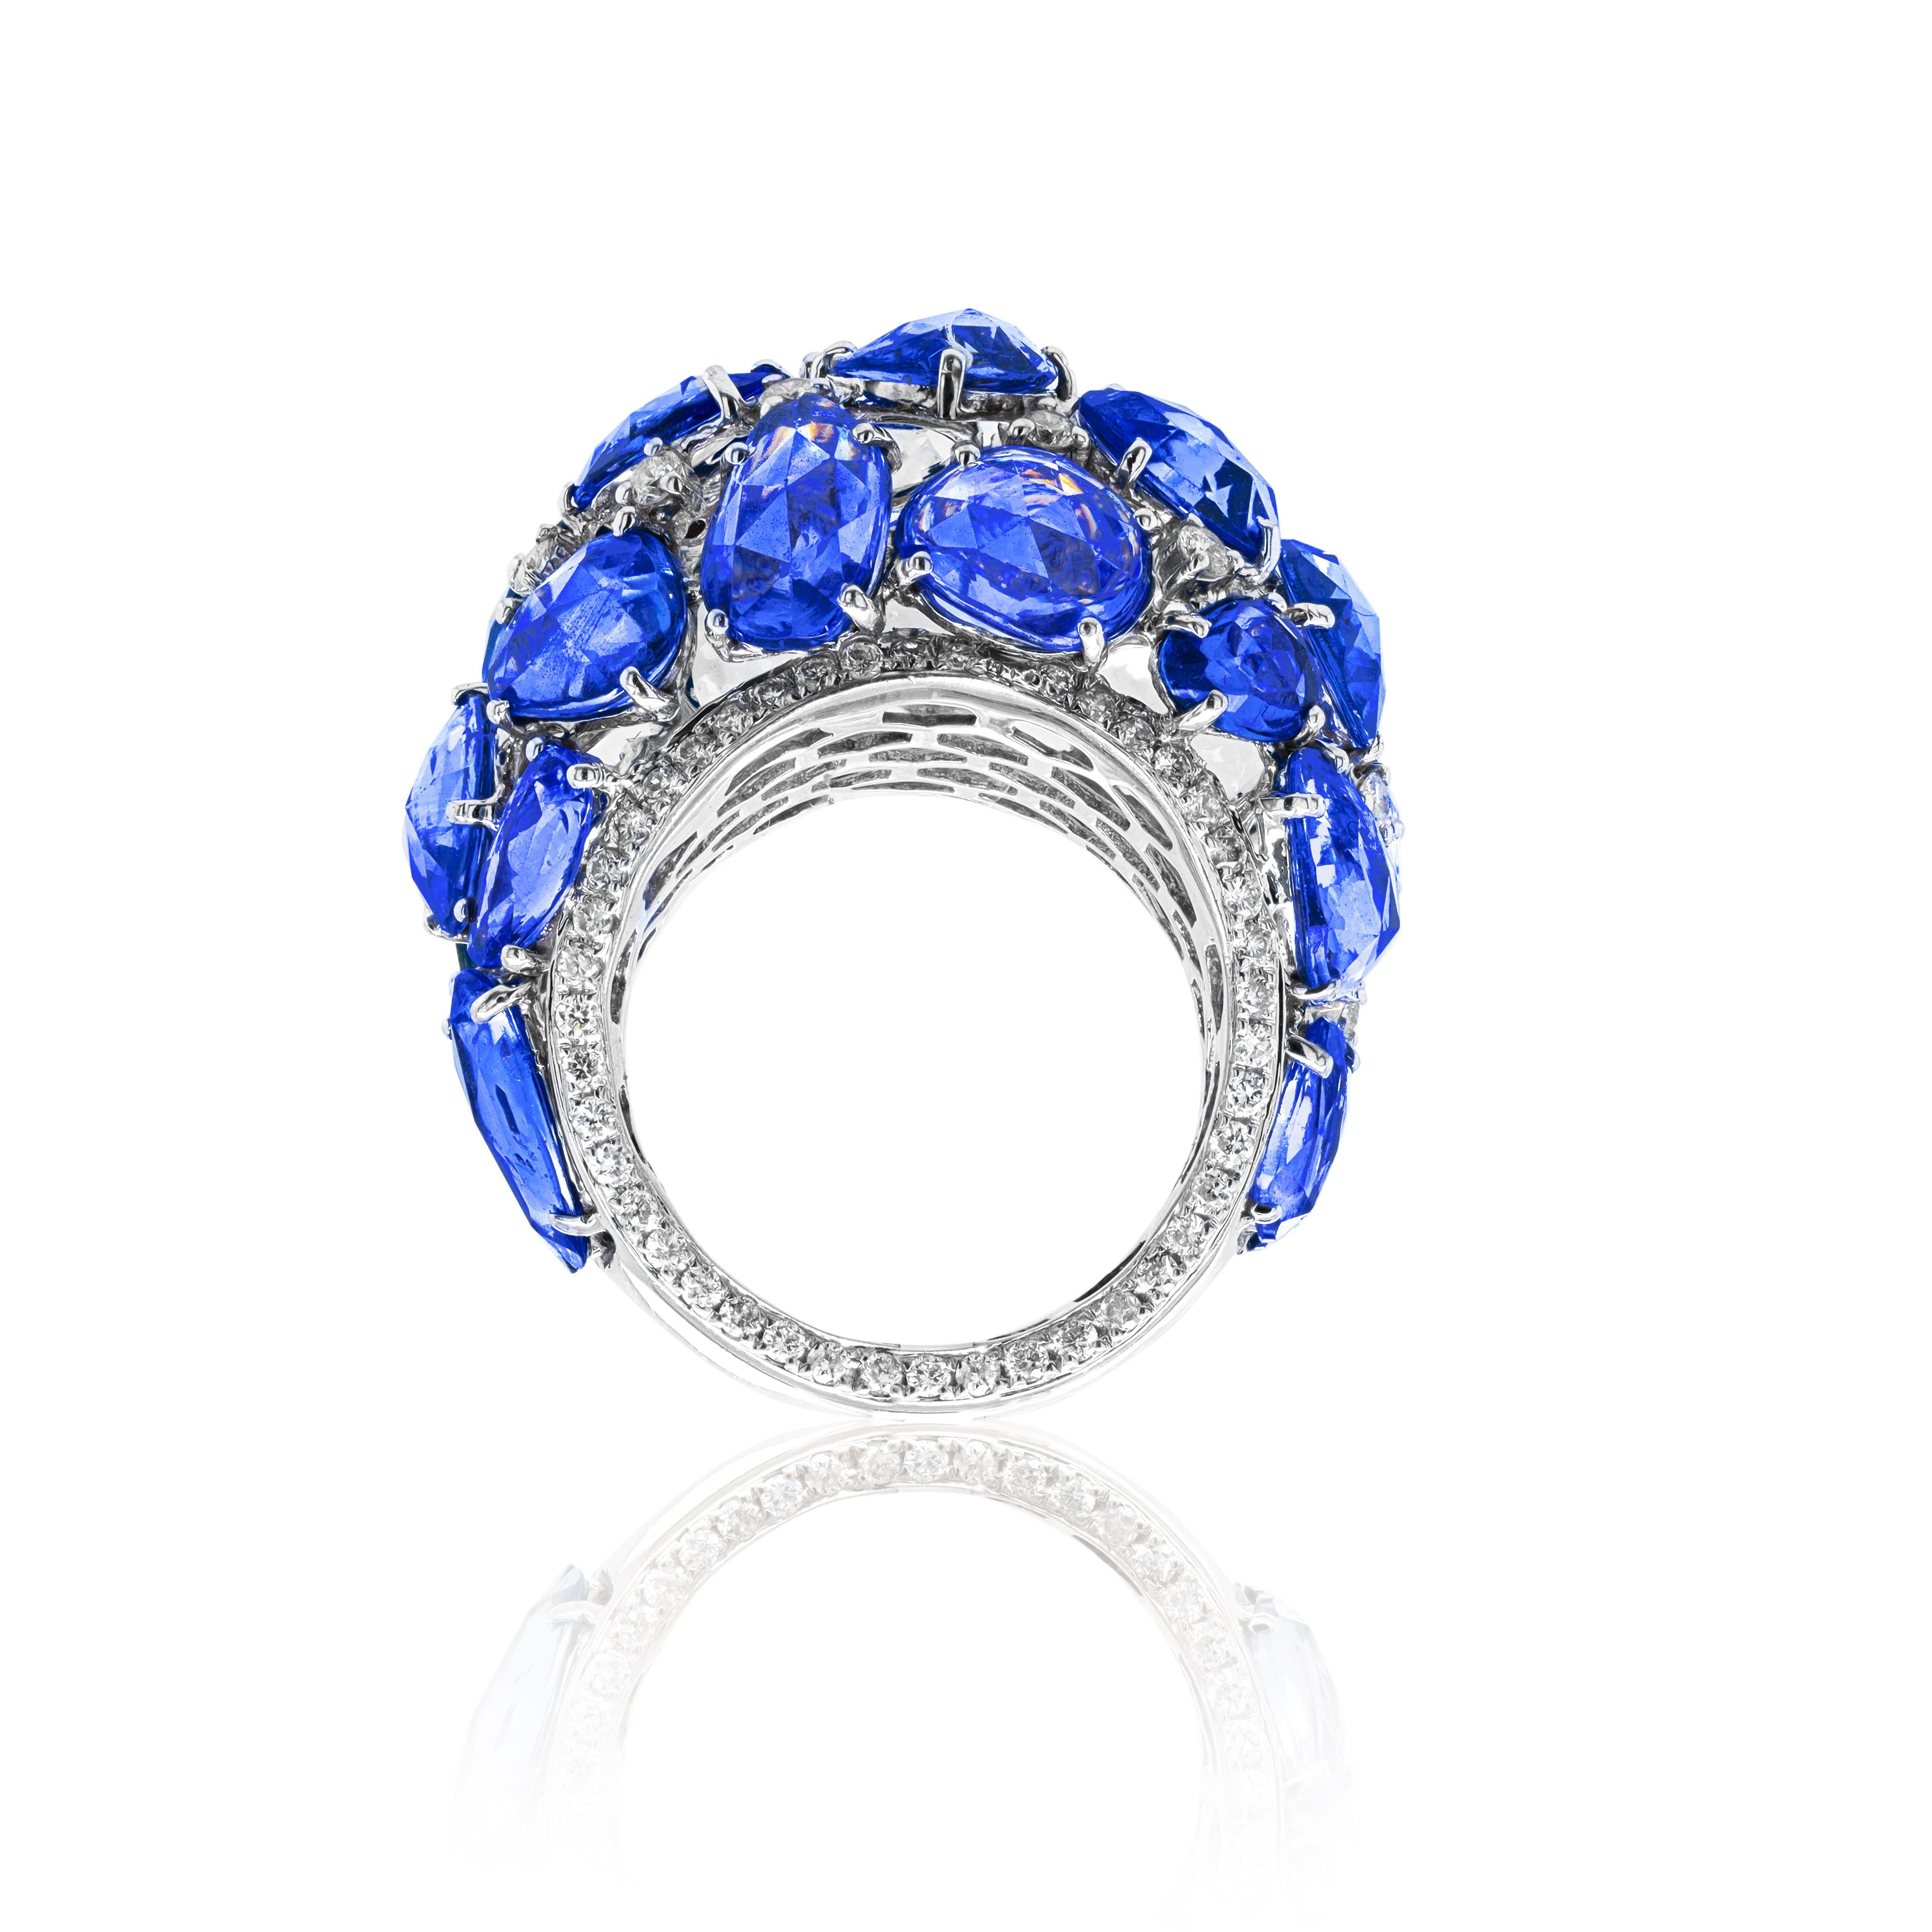 18k white gold, blue rose cut sapphire ring, features 20.00 cts of blue rose cut sapphires with 1.25 cts of diamonds.
Diana M. is a leading supplier of top-quality fine jewelry for over 35 years.
Diana M is one-stop shop for all your jewelry